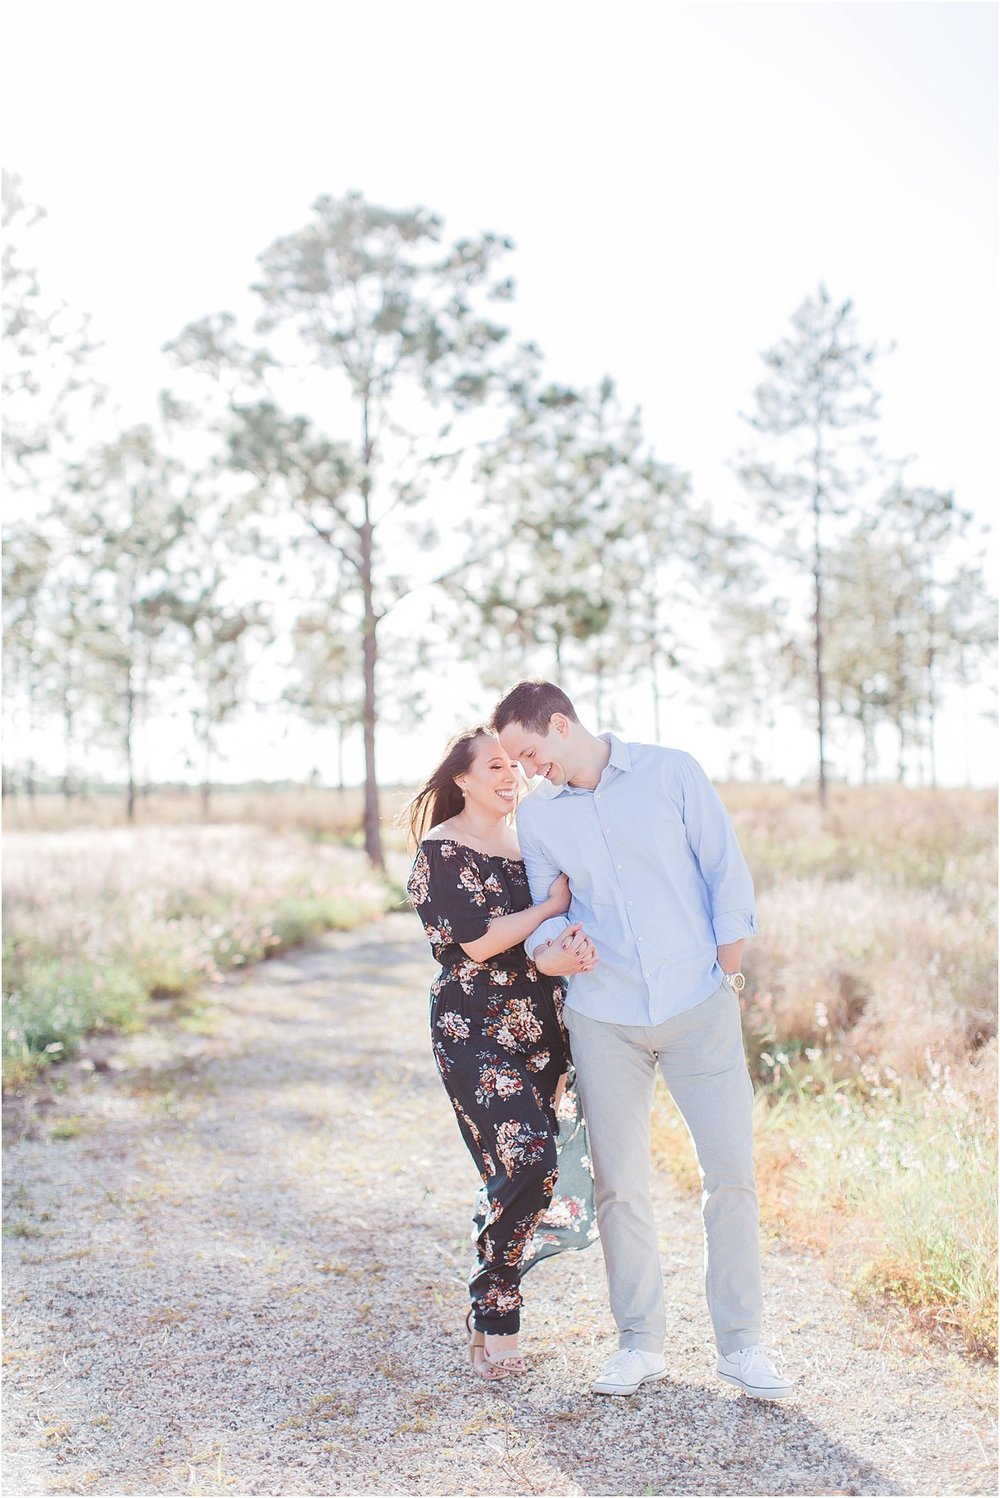 Bok Tower Engagement Session Fall Florida Tampa St Augustine DeLand Wedding Photographer19.jpg